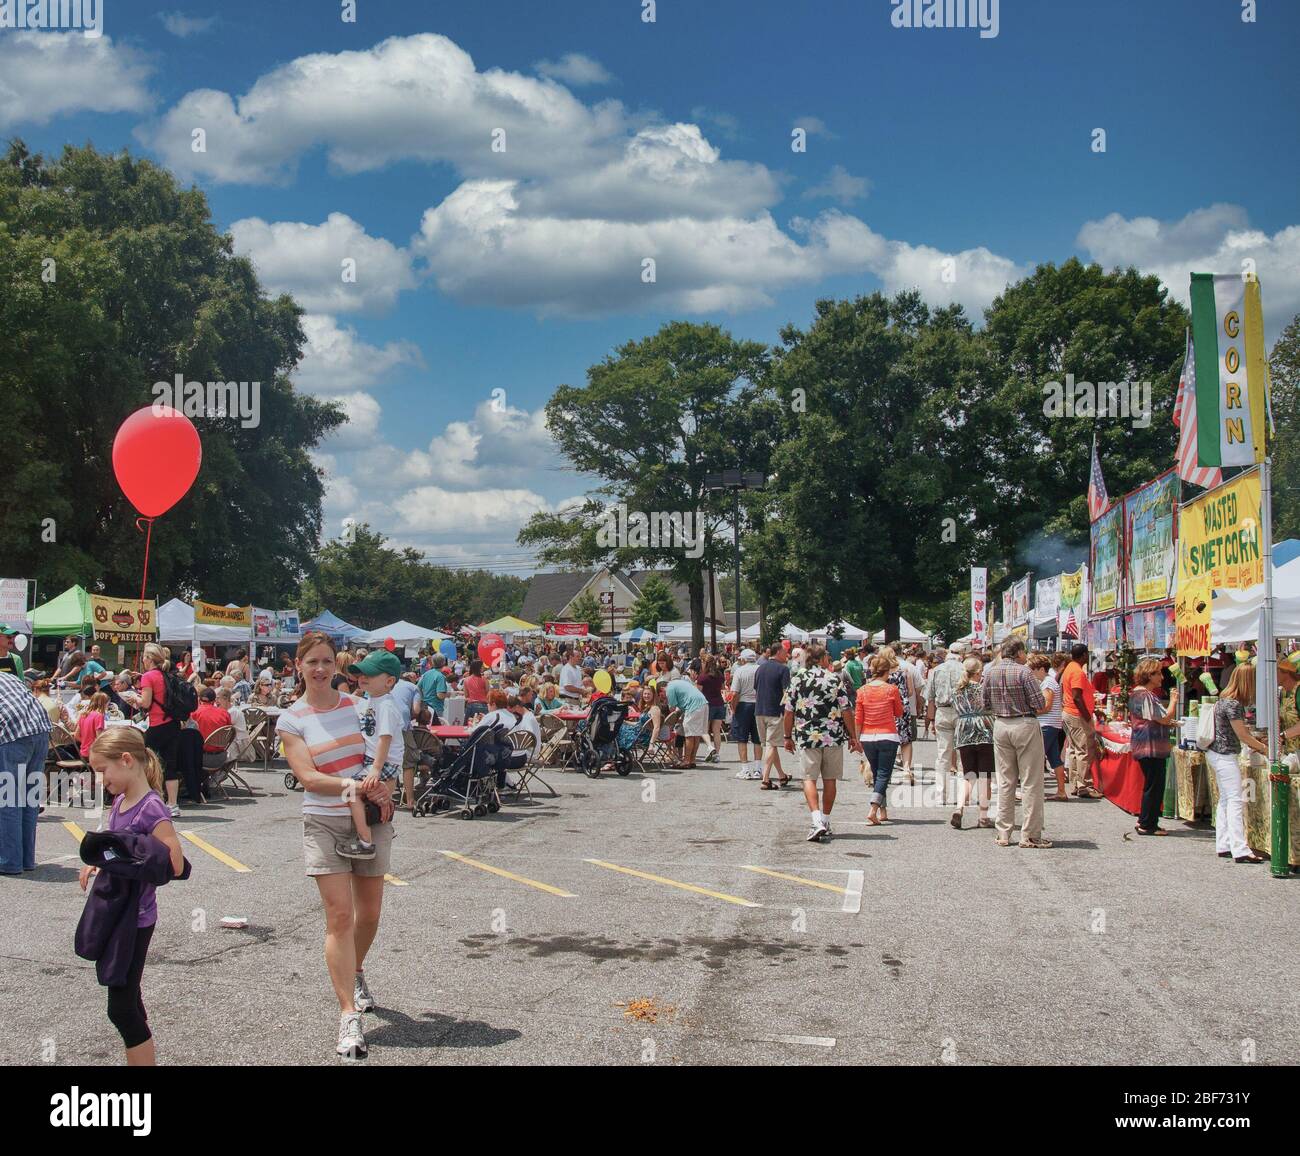 Families at Food Area of Festival Stock Photo